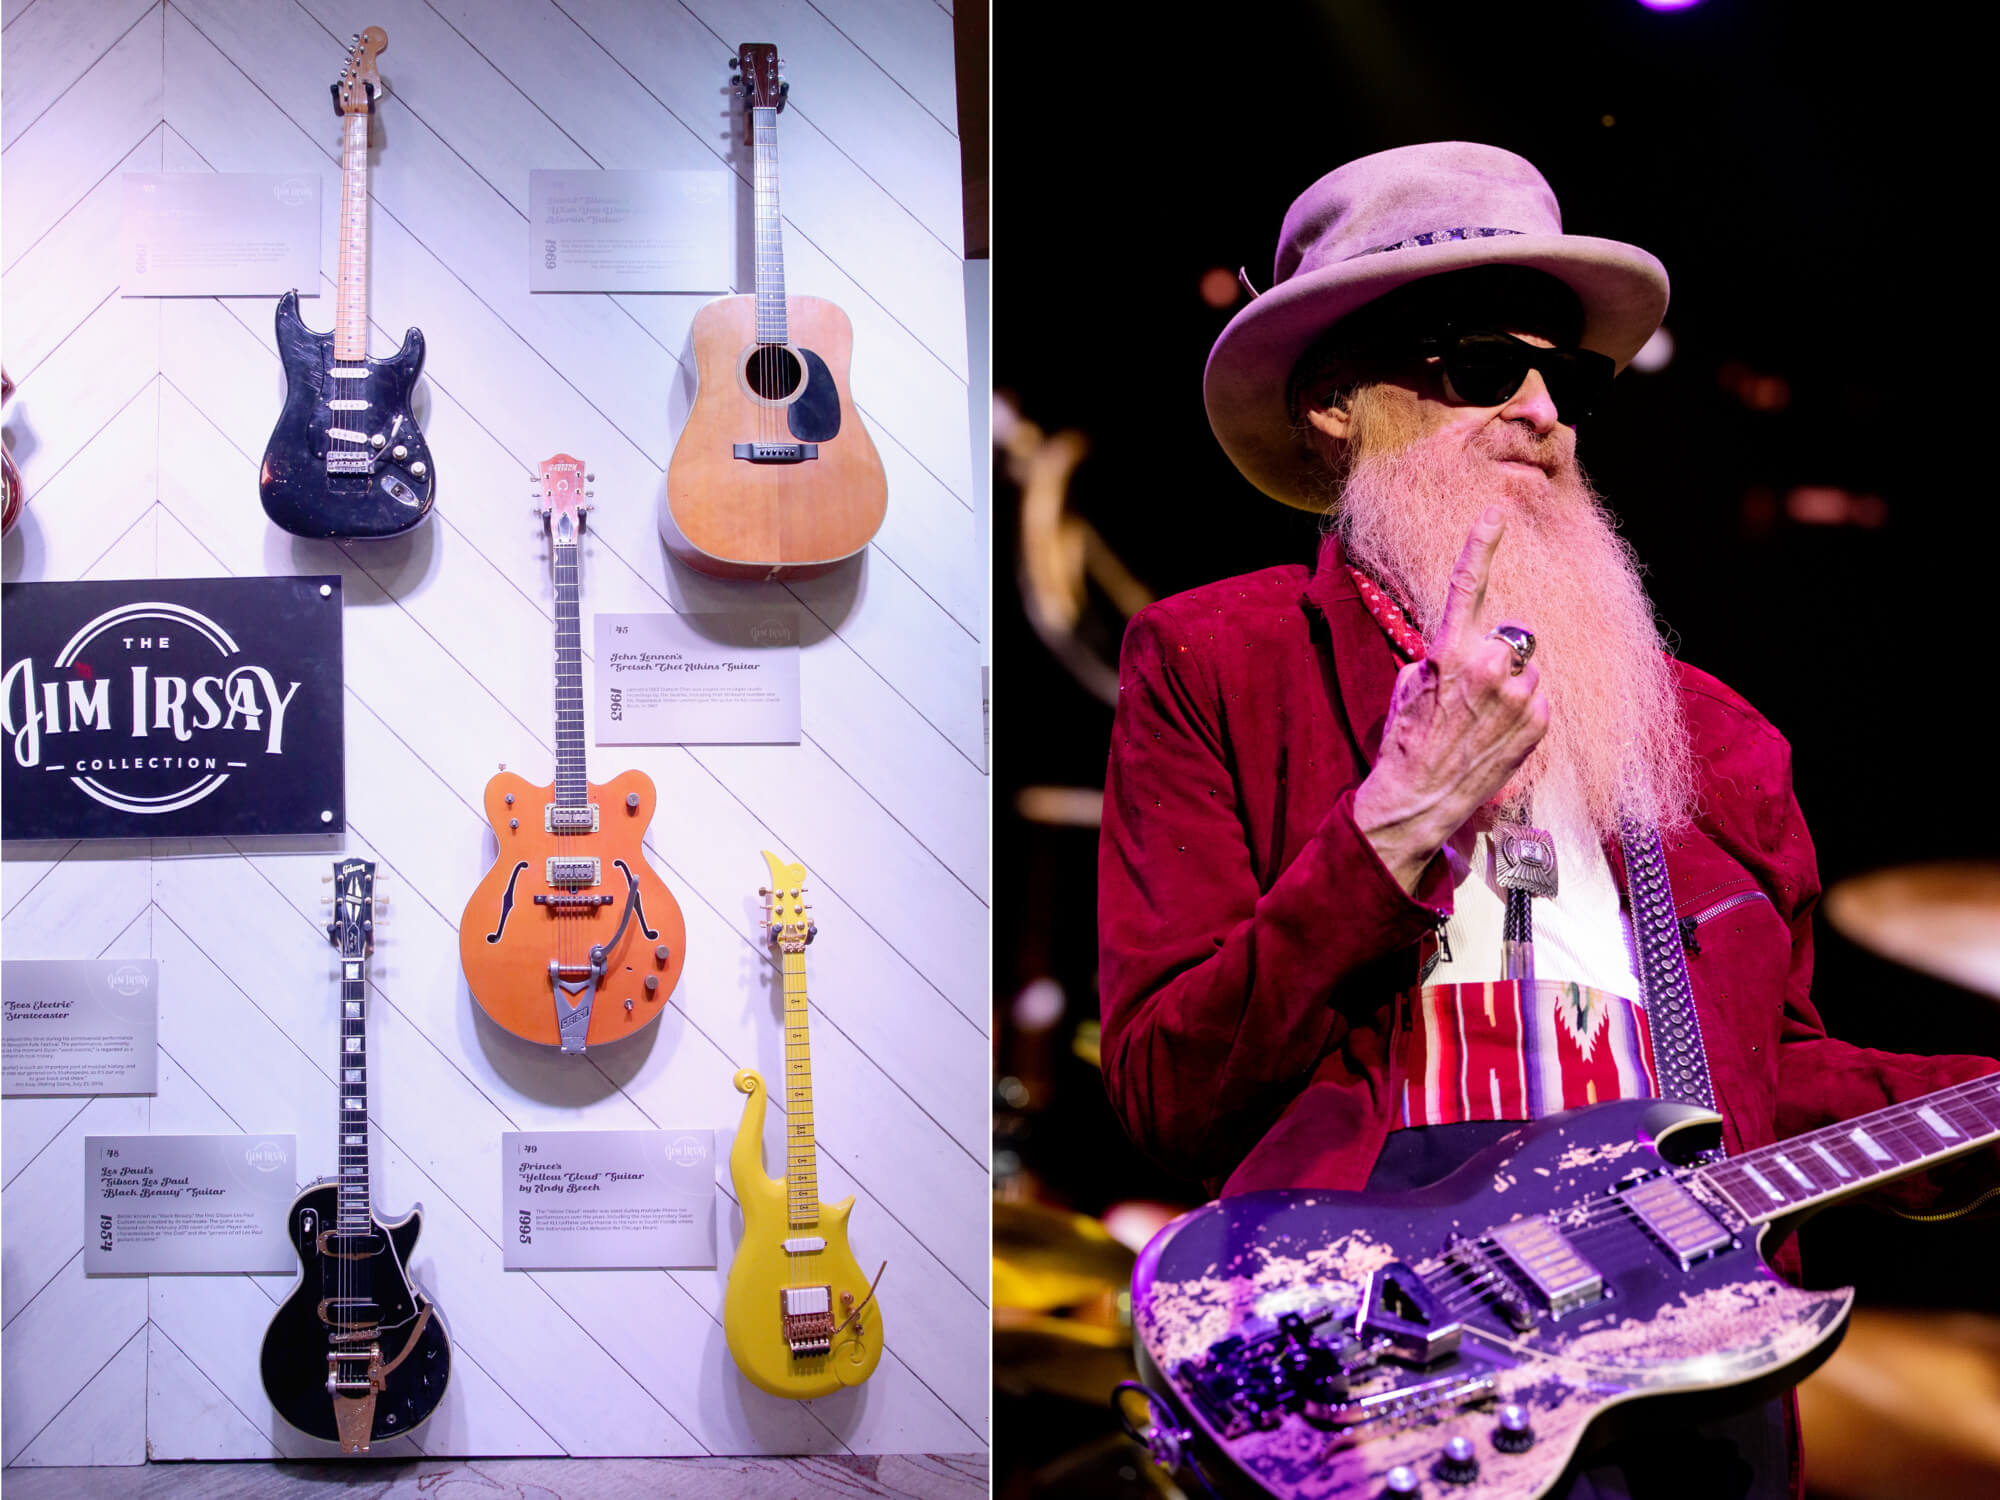 Jim Irsay Collection and Billy Gibbons of ZZ Top